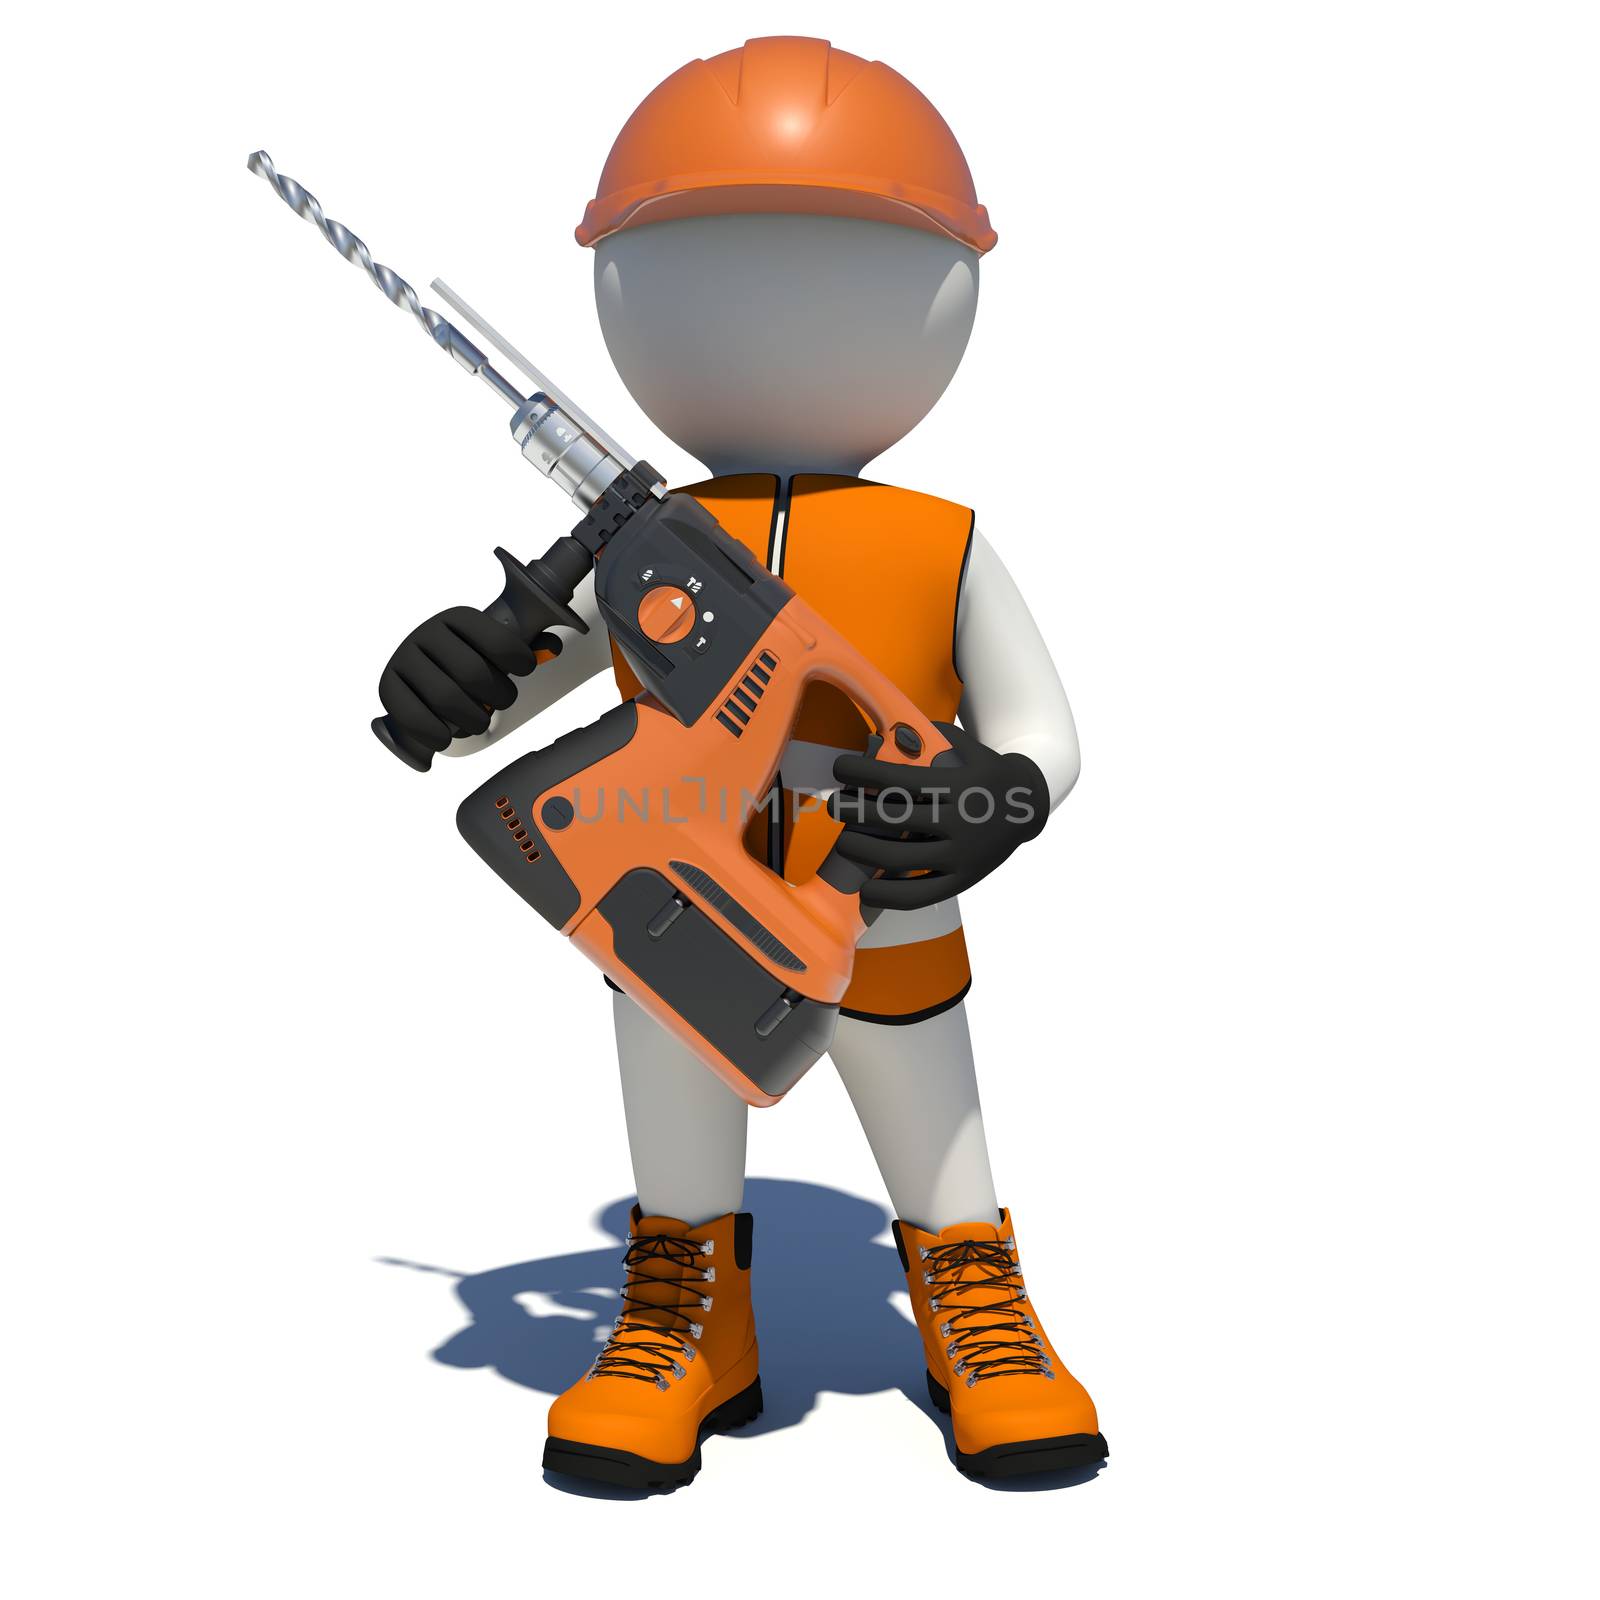 Worker in overalls holding electric perforator. Isolated render on white background